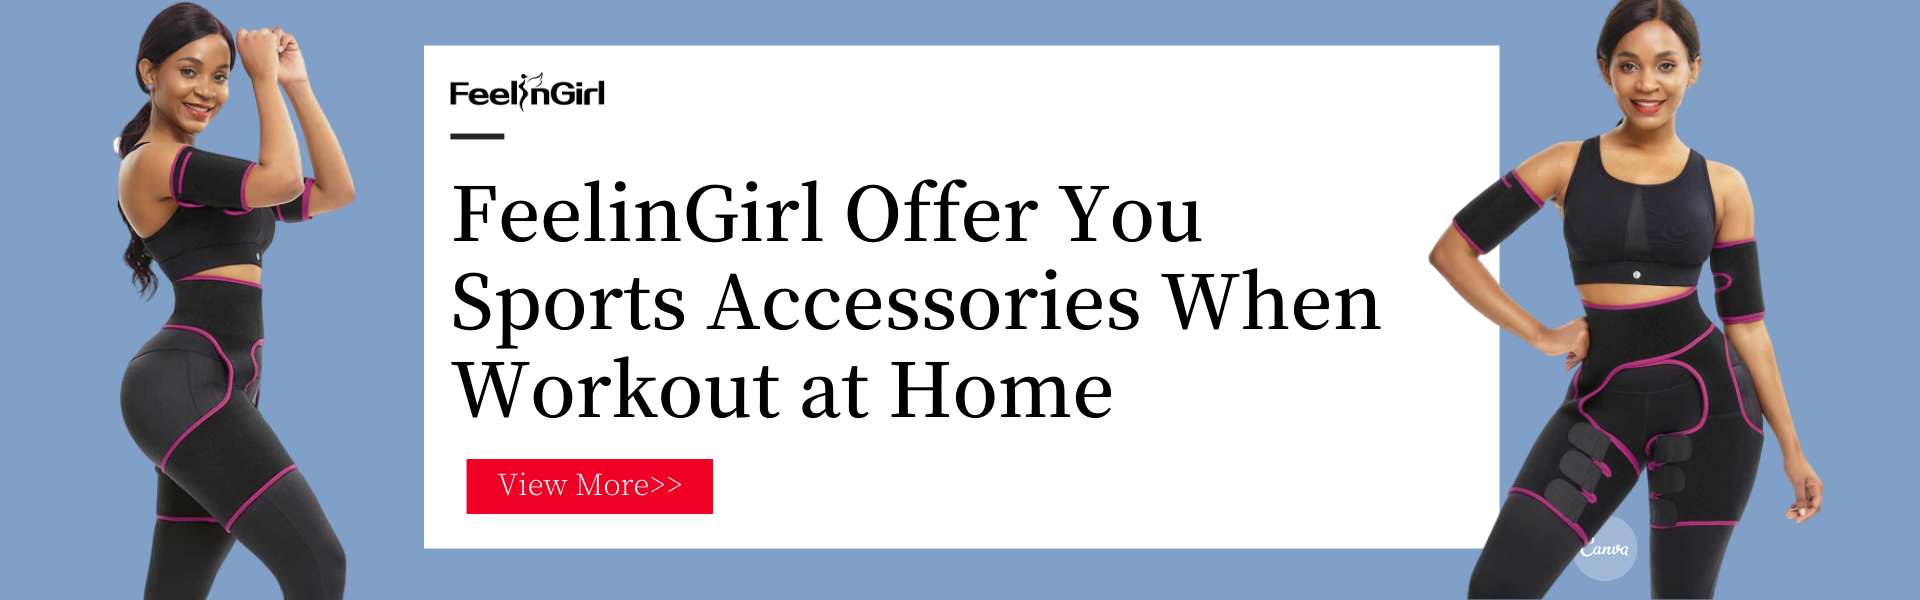 FeelinGirl Offer You Sports Accessories When Workout at Home